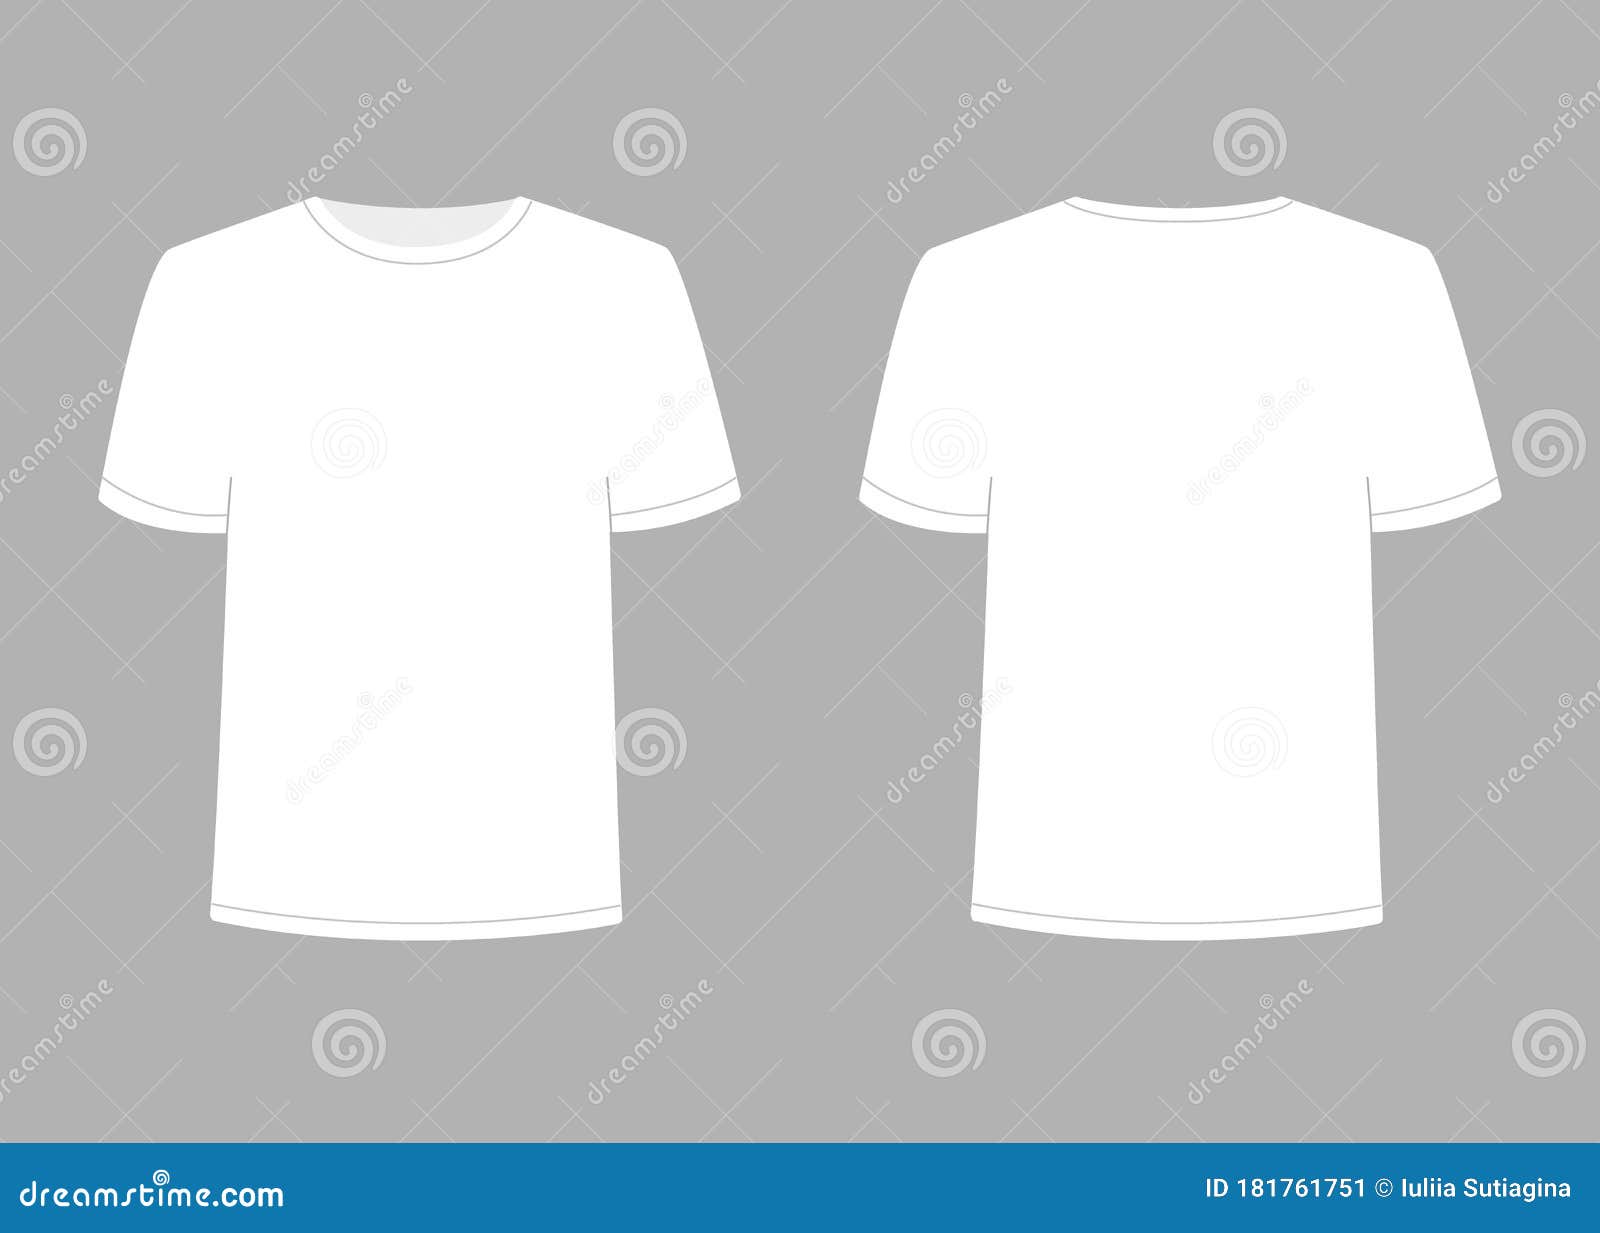 Mens White T-shirt with Short Sleeve. Shirt Mockup in Front and Back ...